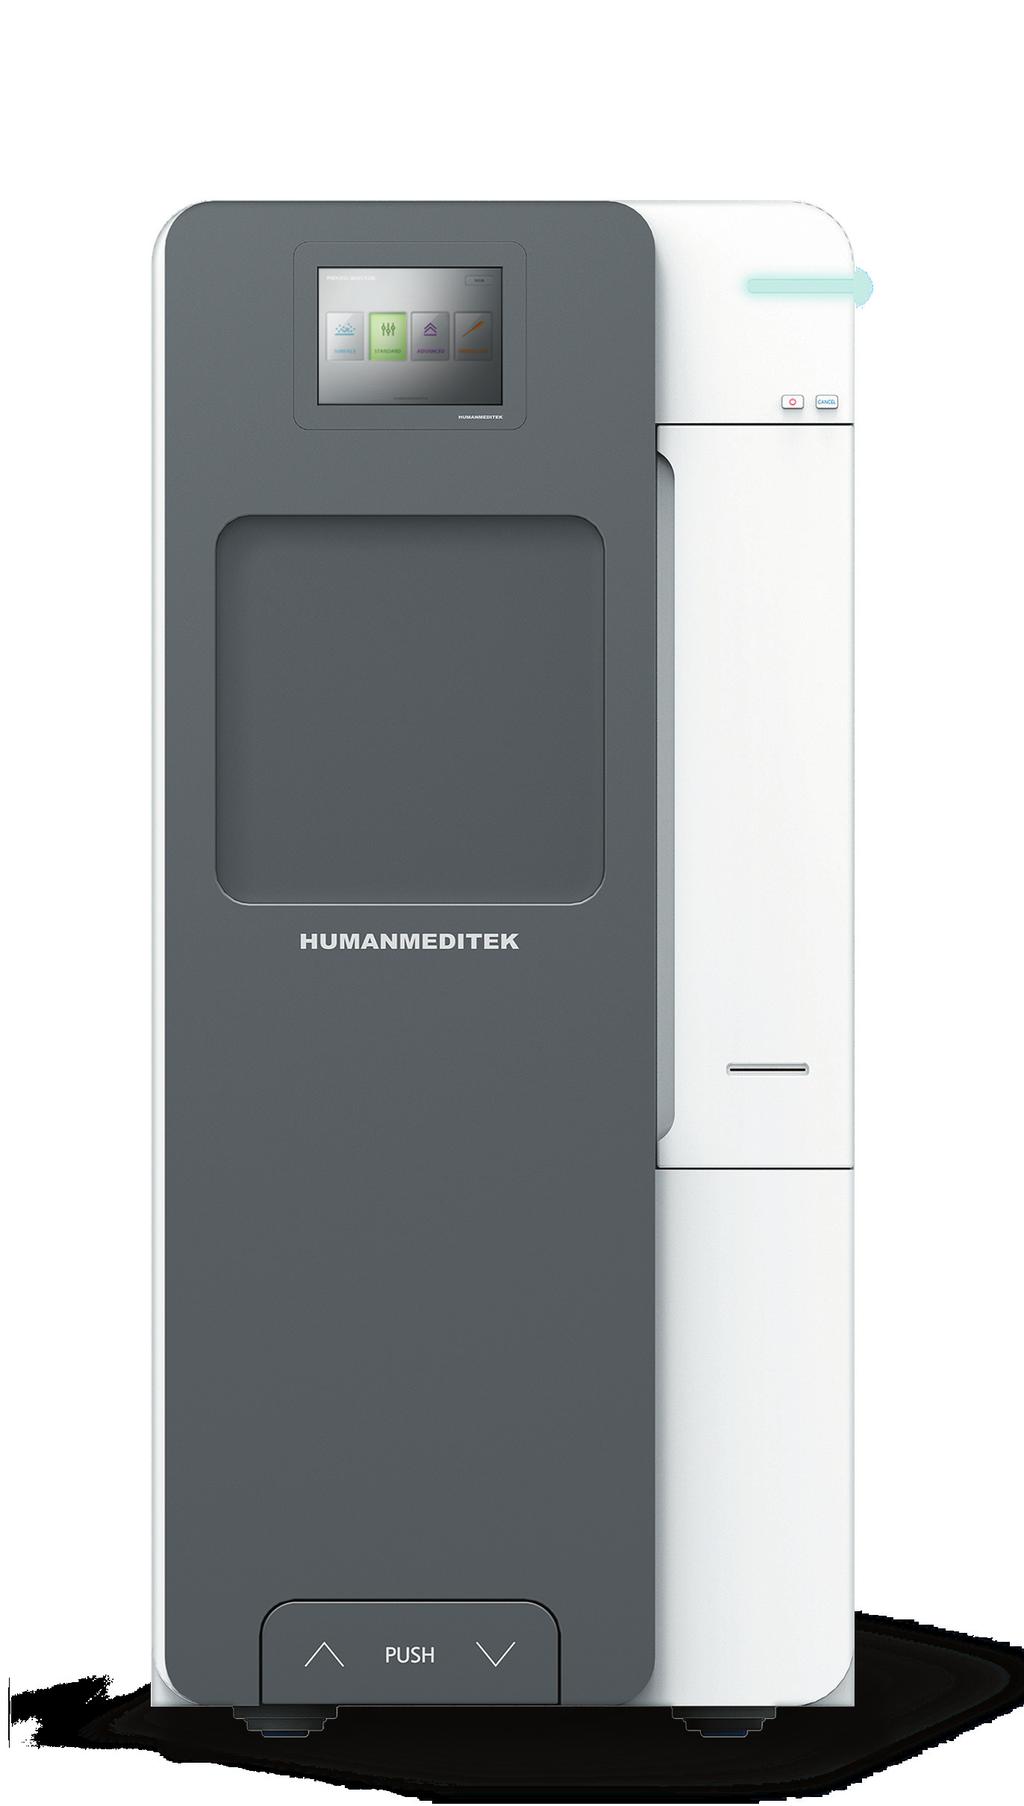 HMTS-142SE HMTS-142SE NEW HMTS-142 SE is the latest and most advanced Low Temperature Hydrogen Peroxide Sterilizer from Human Meditek.